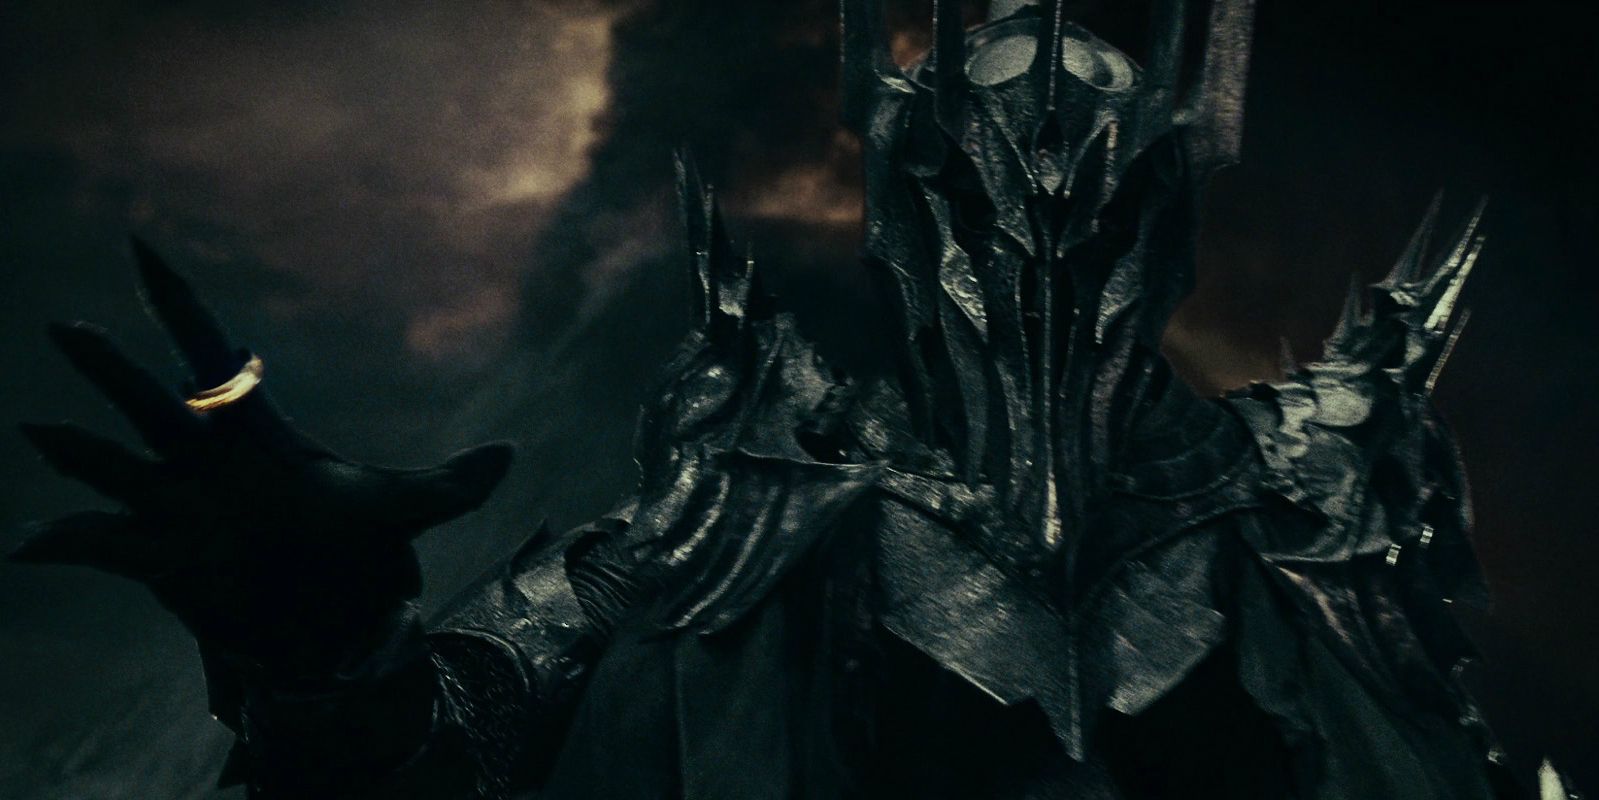 Sauron Prologue in Fellowship of the Ring